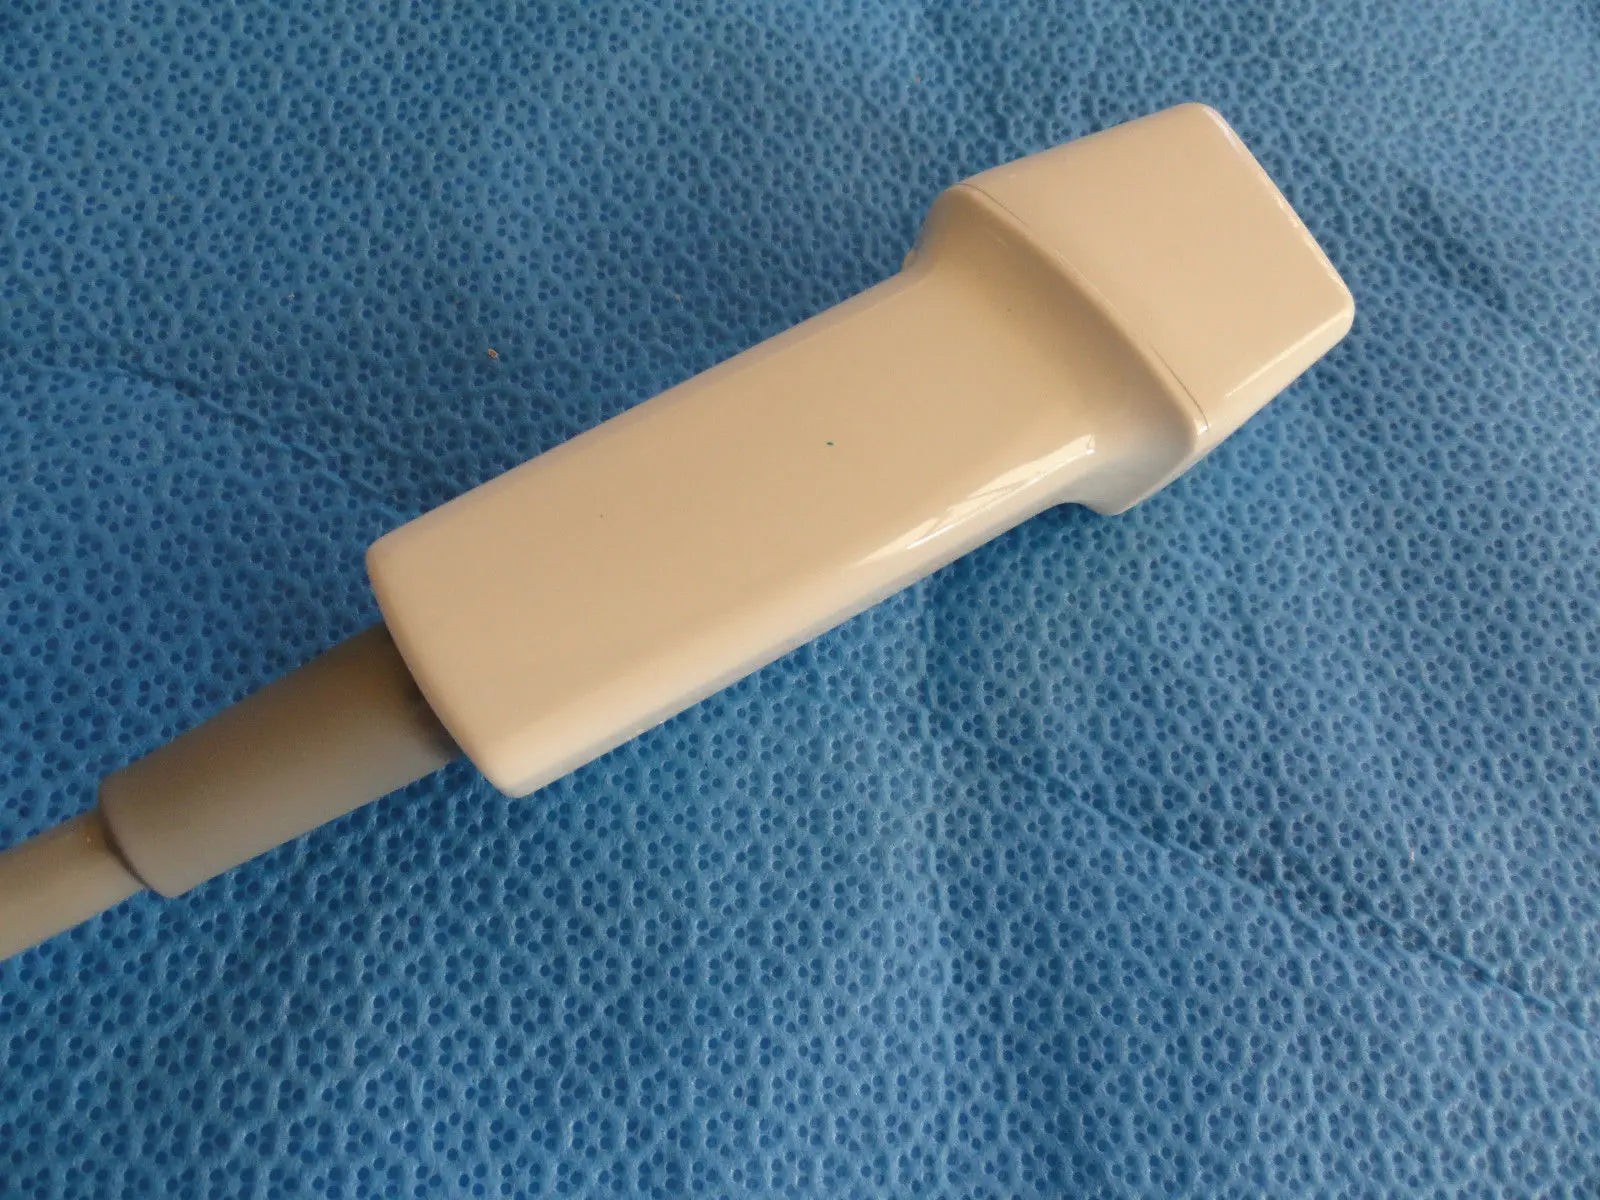 GE 2.5 MHz Cardiac Sector Ultrasound transducer probe for GE RT-6800 (3853)